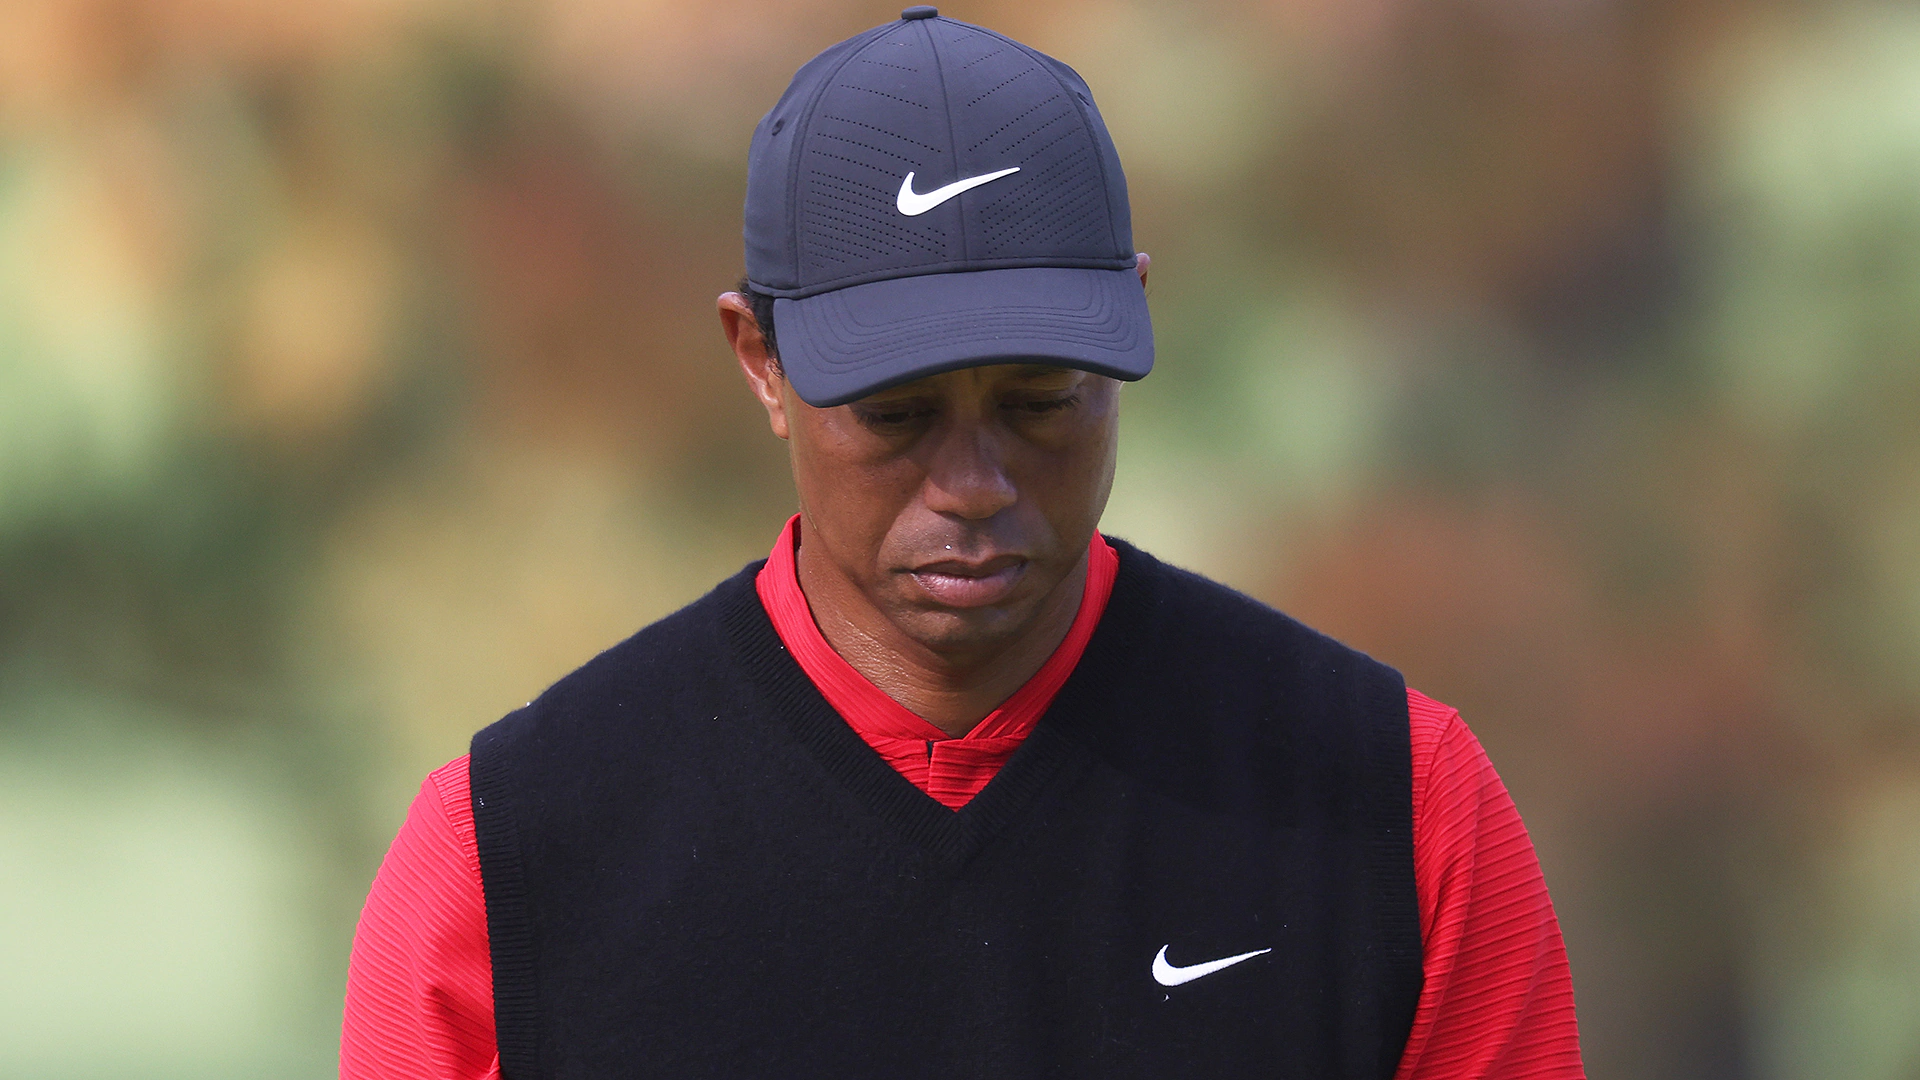 Tiger Woods makes 10 on par-3 12th in final round of Masters Tournament